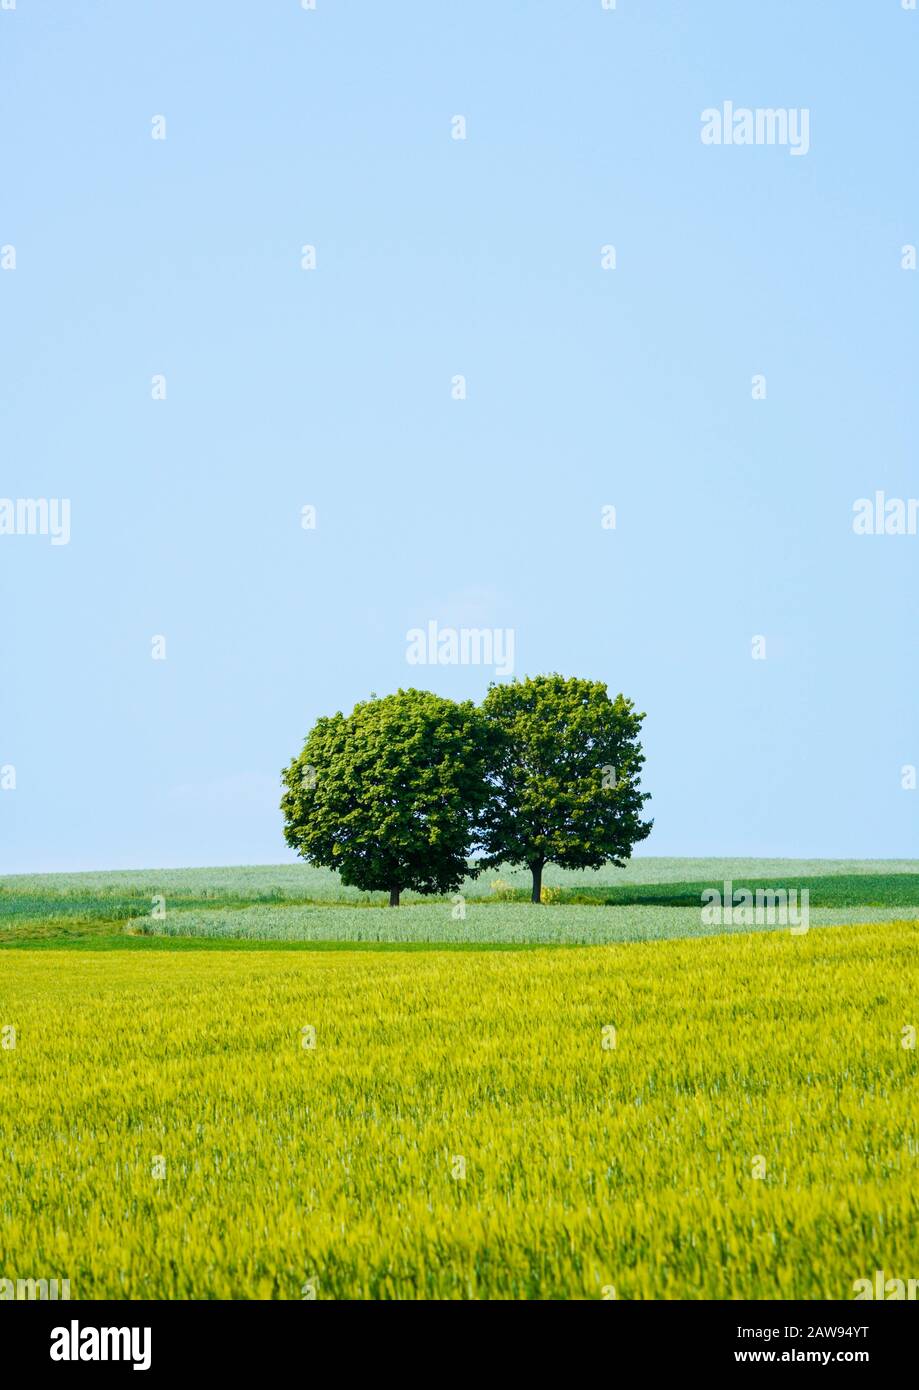 Two trees in a field of ripe crops, Germany, Europe Stock Photo